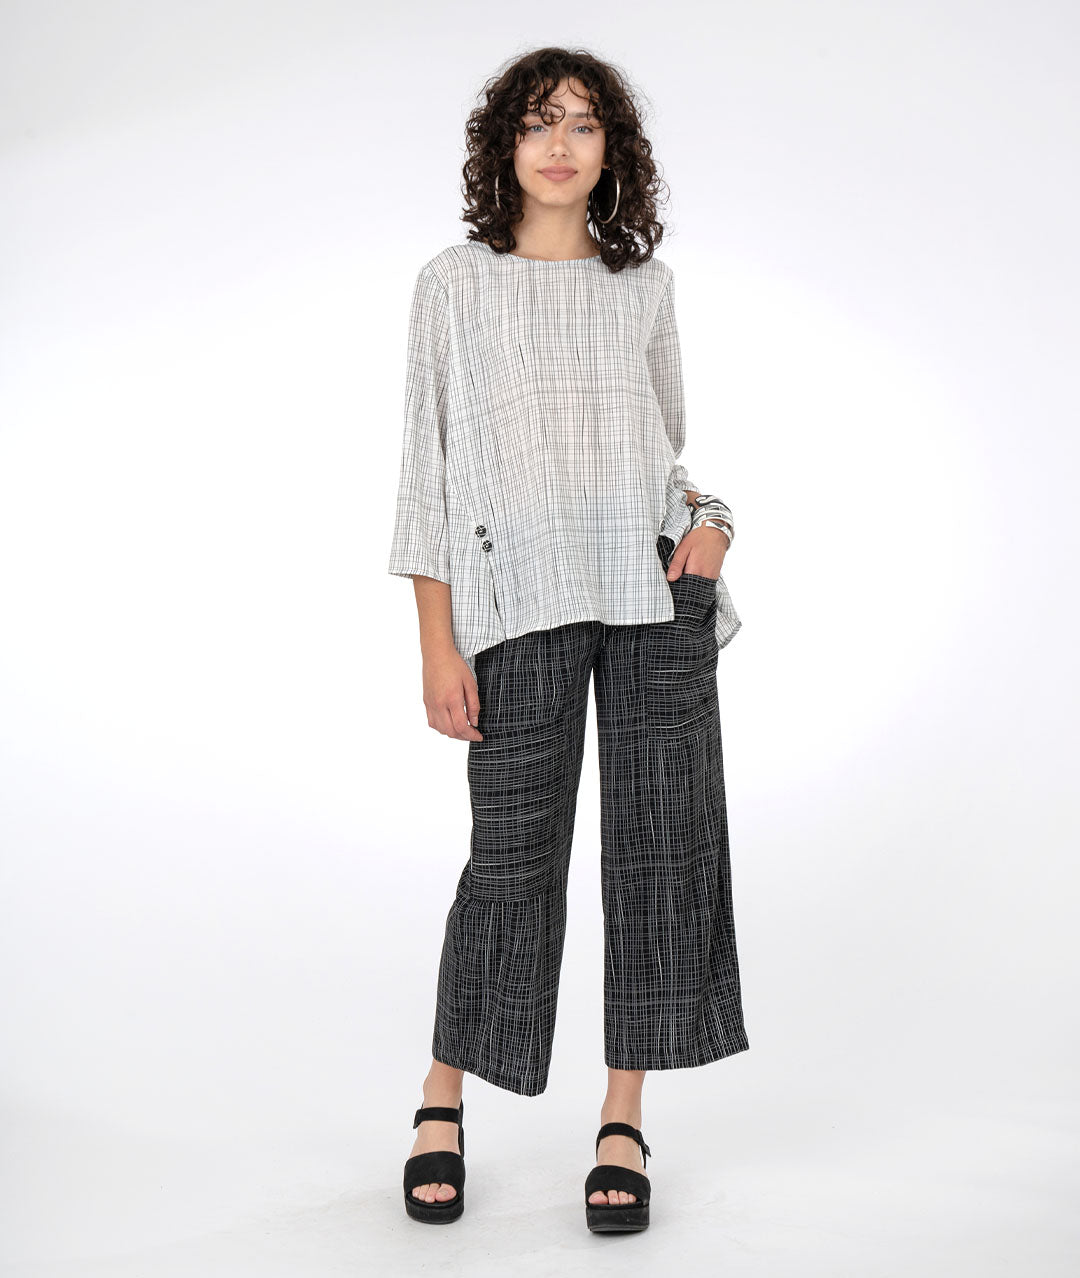 model in a black grid print pant with a white pullover top with a black grid print. top has 3/4 sleeves, godets extending from the sides towards the center front, with a split at each seam topped with a button detail